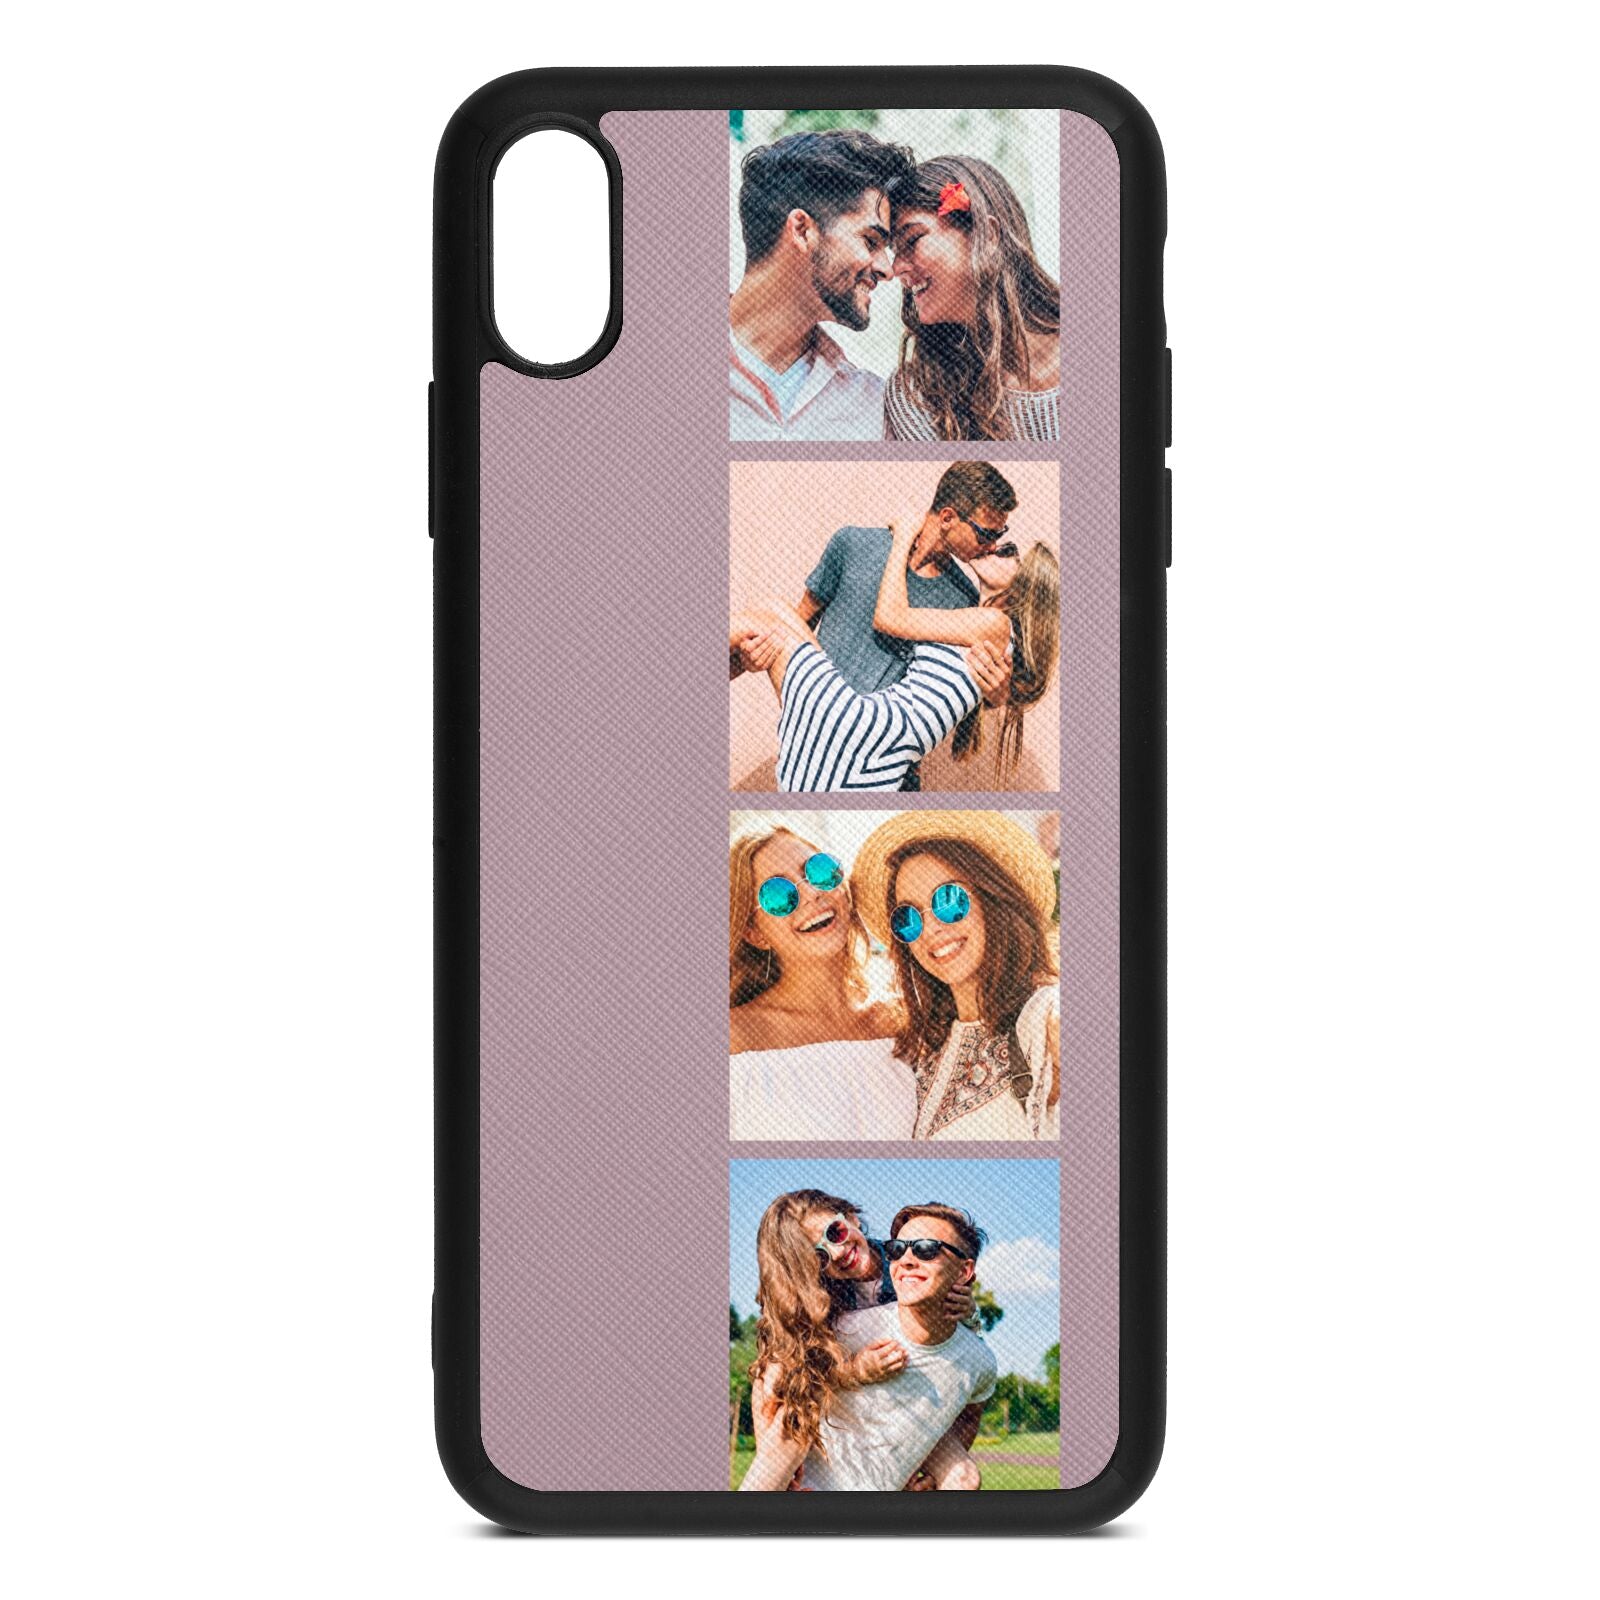 Photo Strip Montage Upload Lotus Saffiano Leather iPhone Xs Max Case